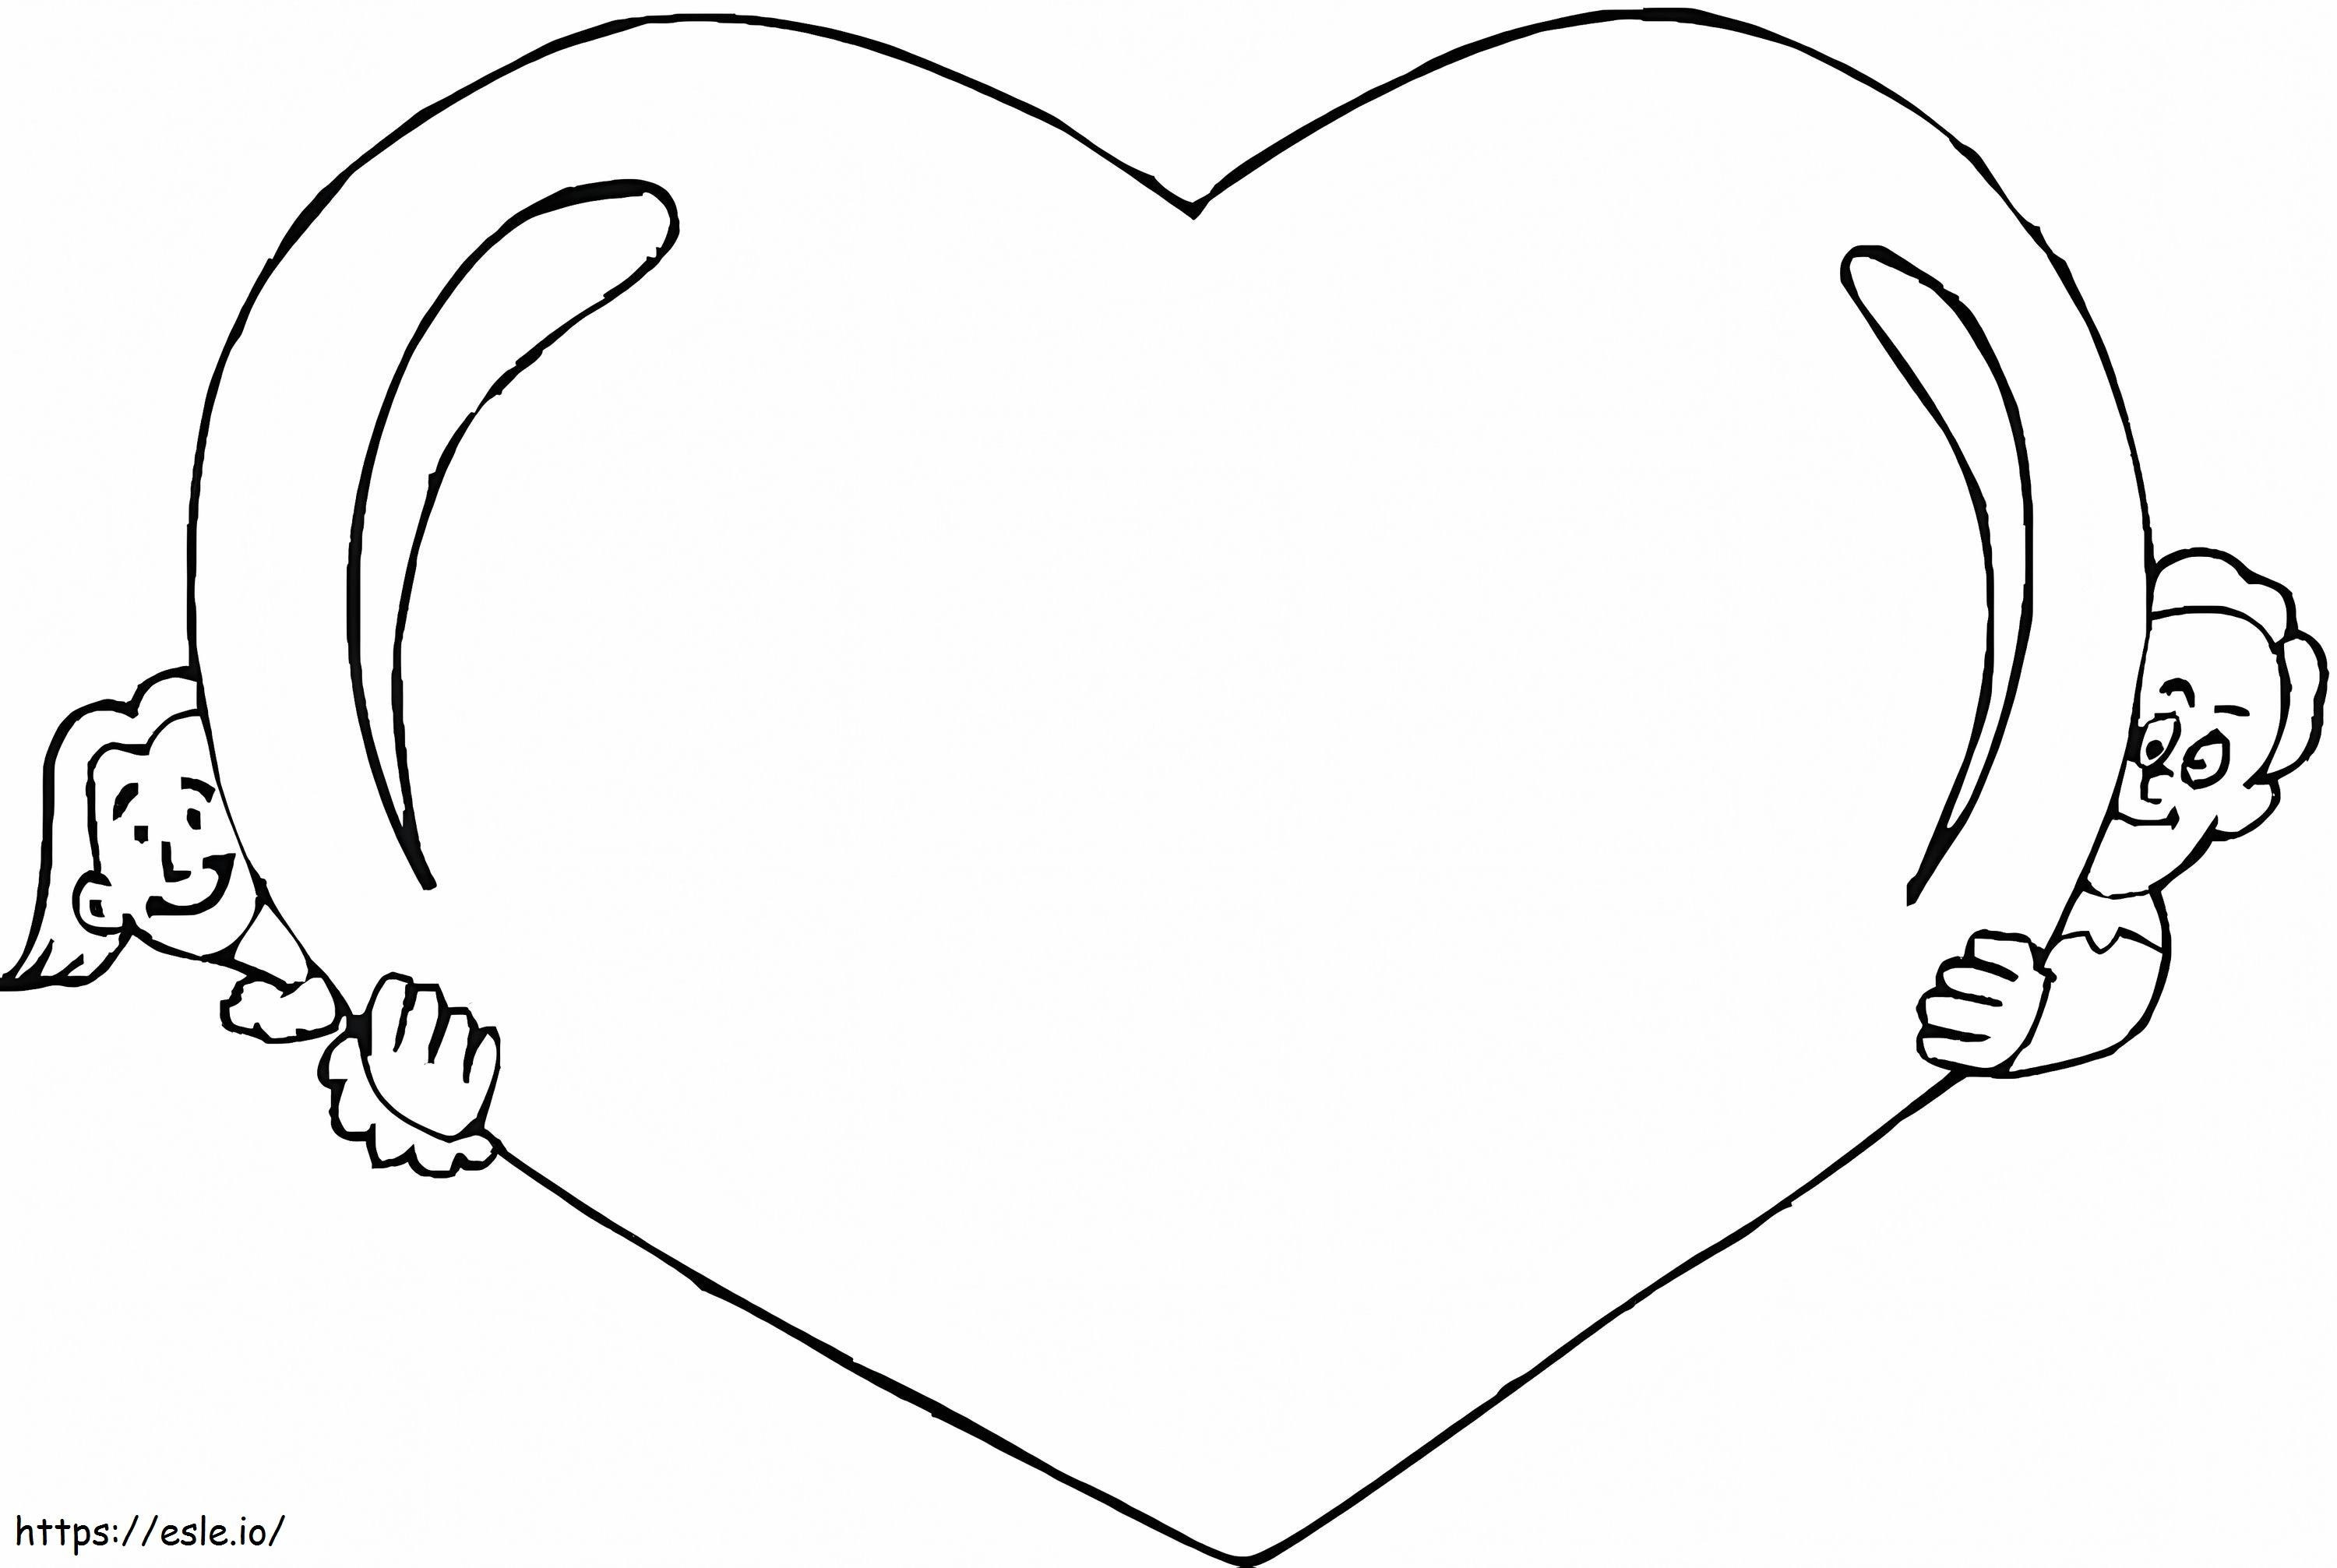 Kids And Heart coloring page